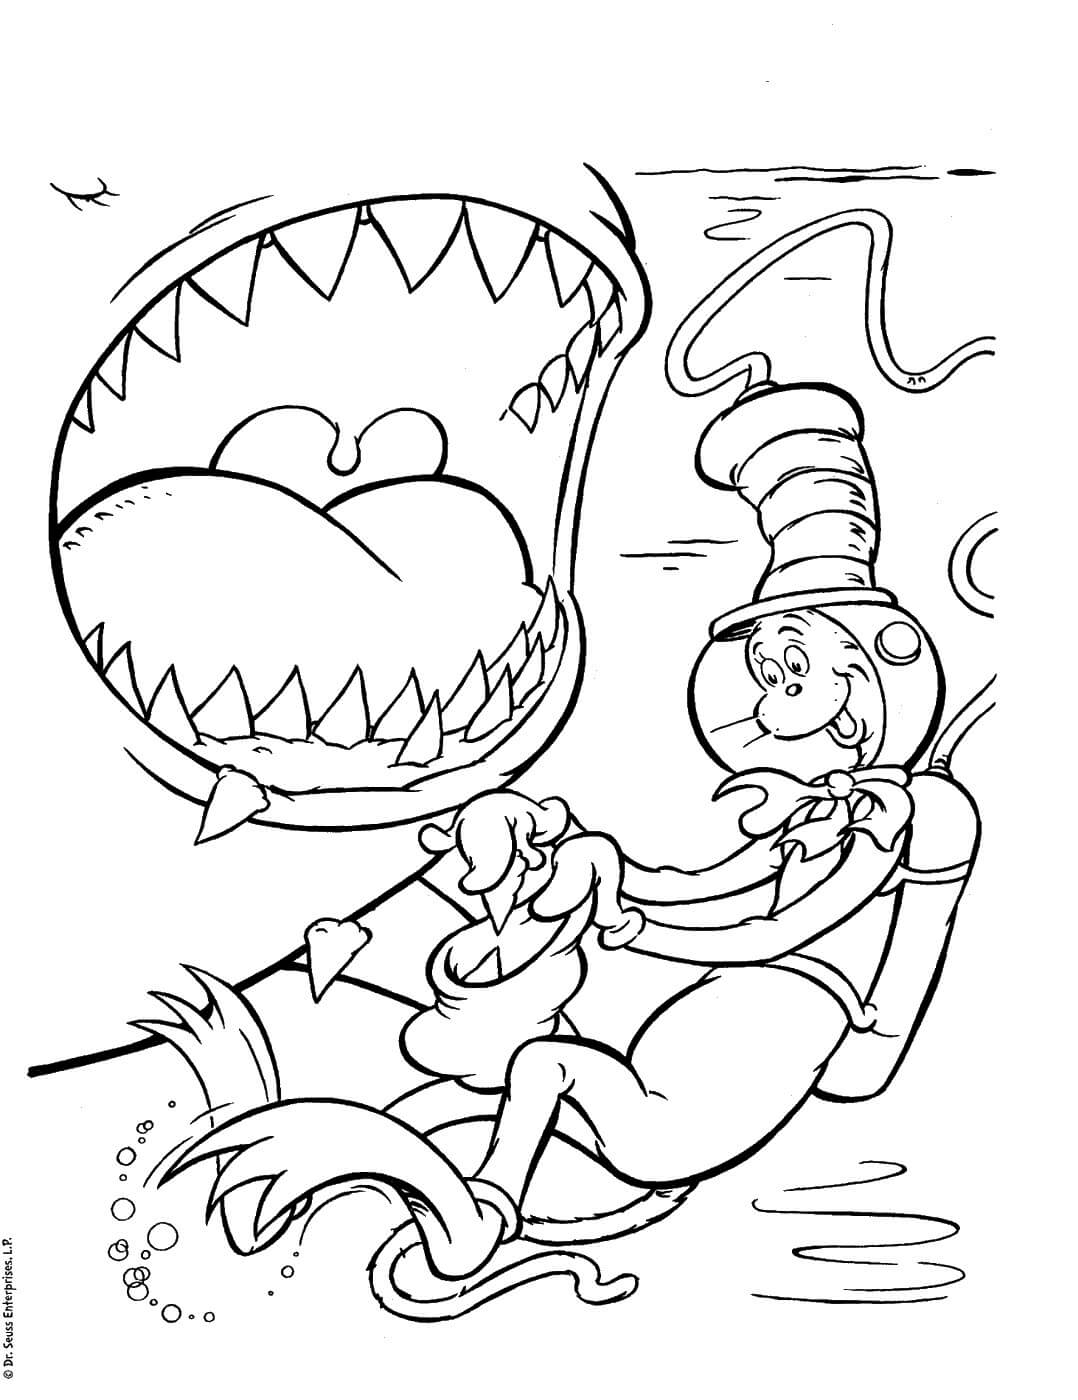 Shark Teeth Cat In The Hat Coloring Pages